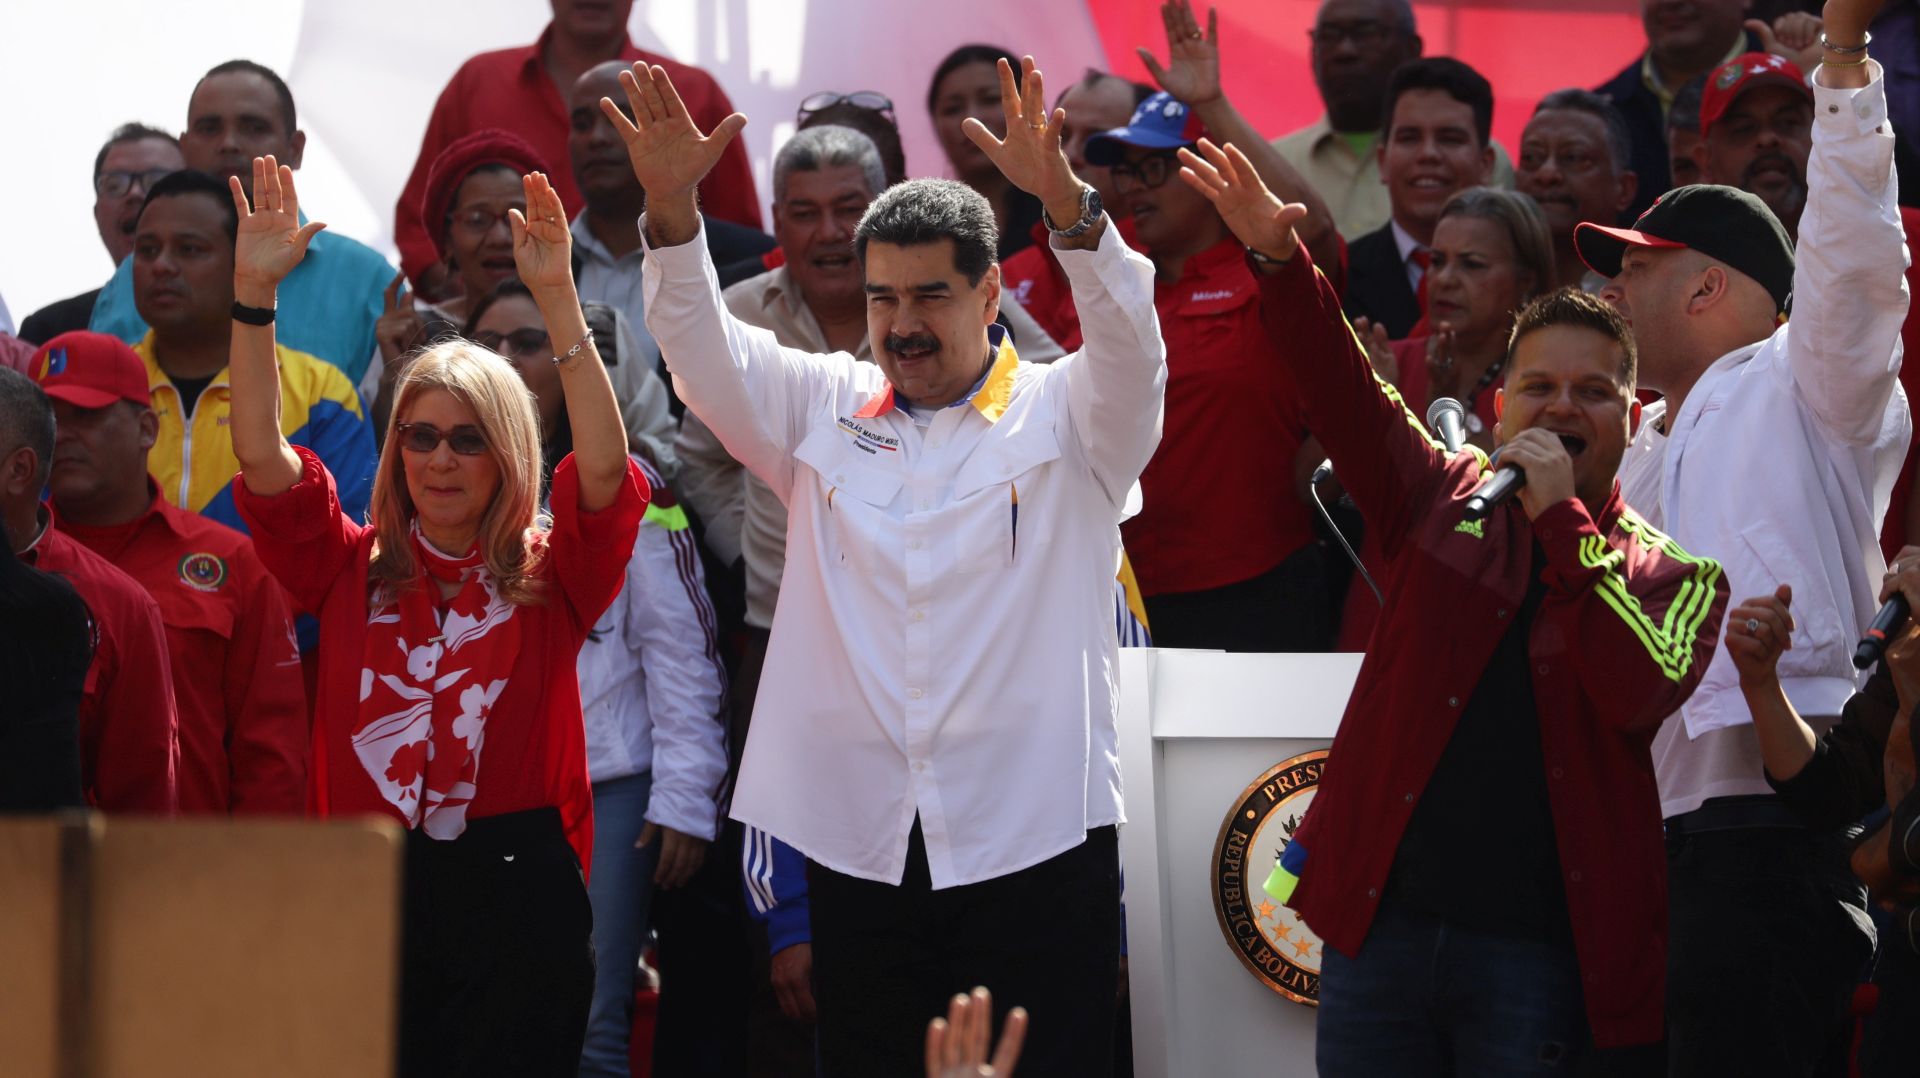 epa07587942 President of Venezuela Nicolas Maduro (C) and the first lady Cilia Flores (C-L) participate in an act of government to celebrate the first anniversary of the elections in Venezuela, of which Maduro proclaimed himself the winner, and that have not been recognized by the international community due to alleged irregularities, in Caracas, Venezuela, 20 May 2019.  EPA/Rayner Pena